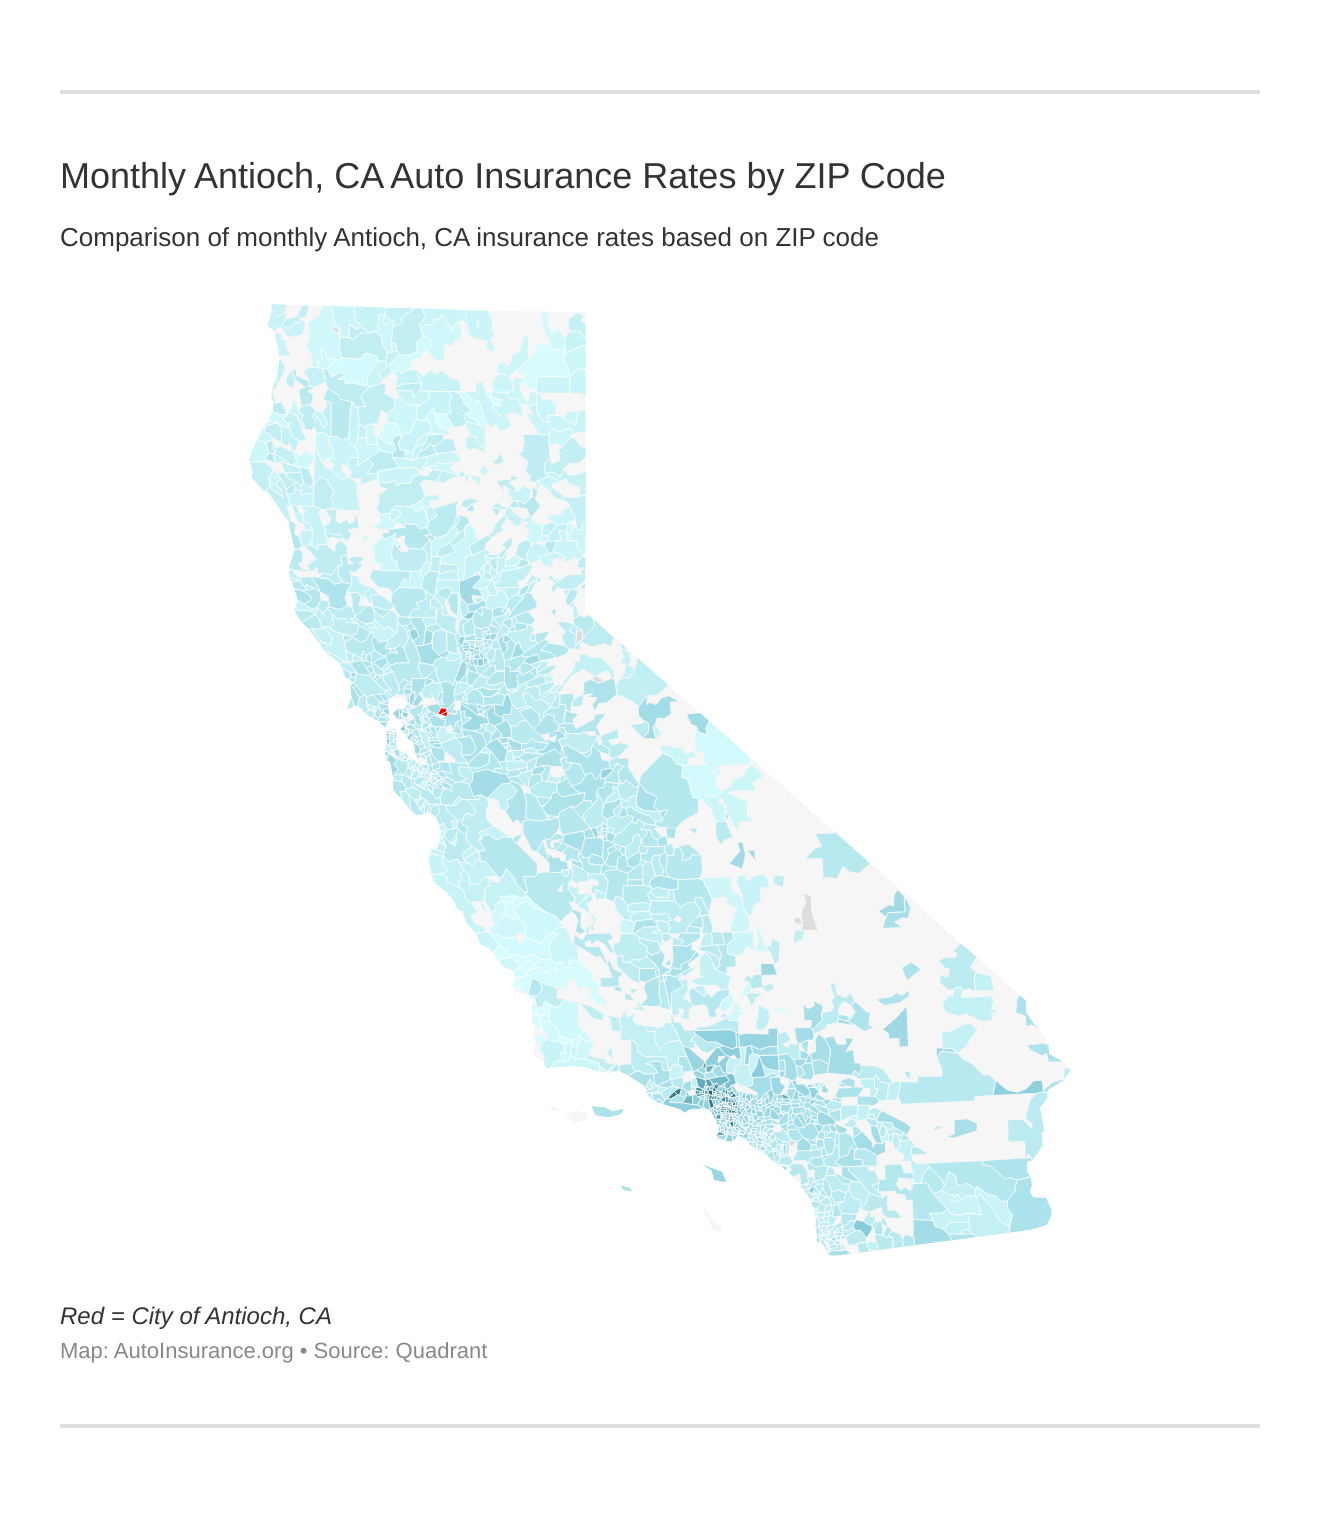 Monthly Antioch, CA Auto Insurance Rates by ZIP Code